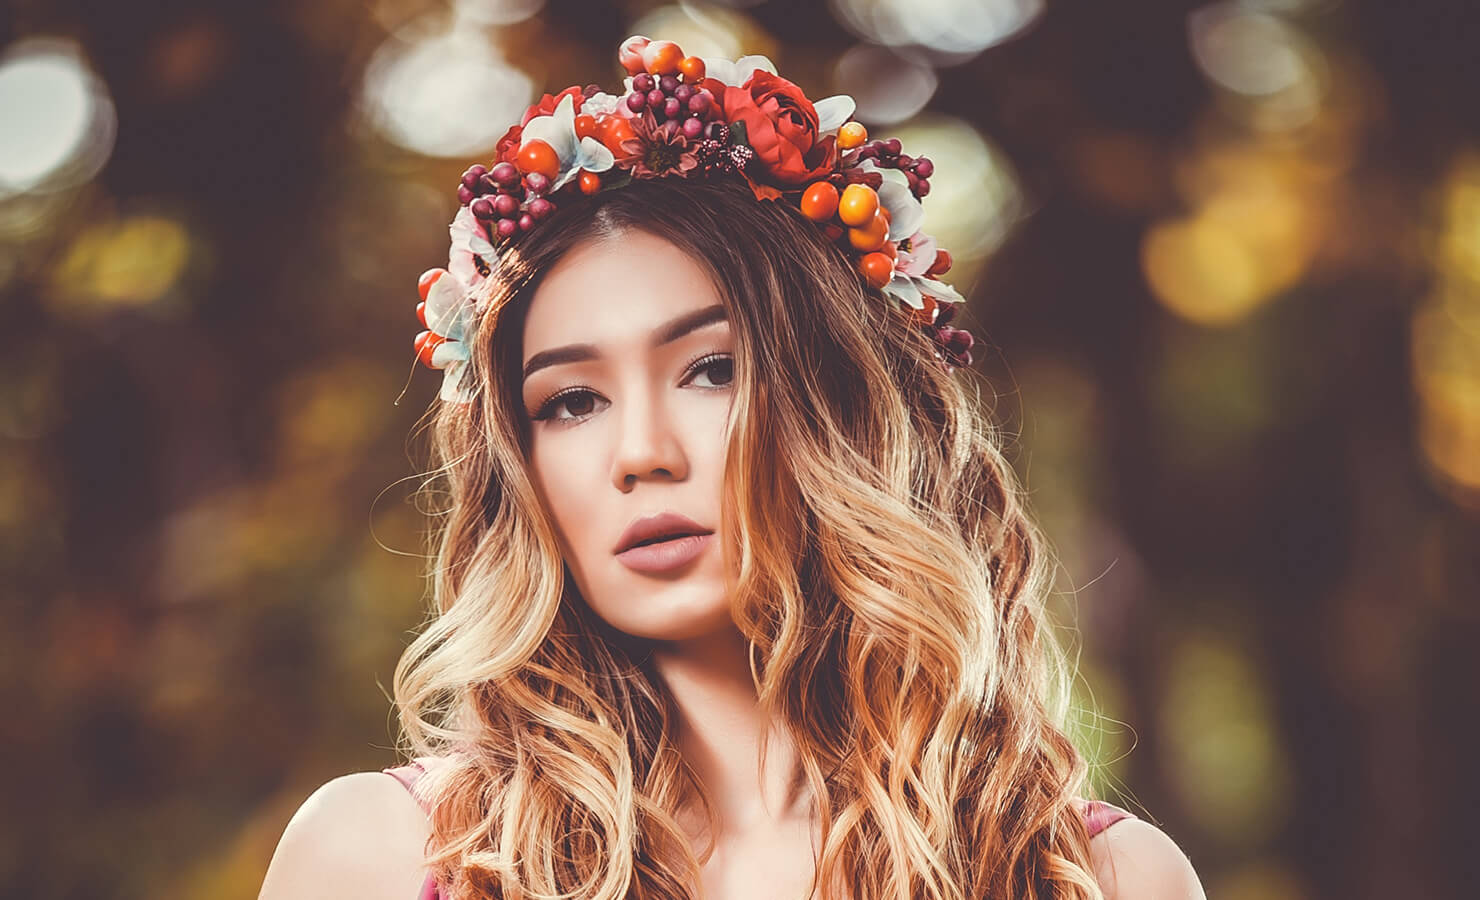 DIY: How to make a gorgeous flower crown in 7 easy steps